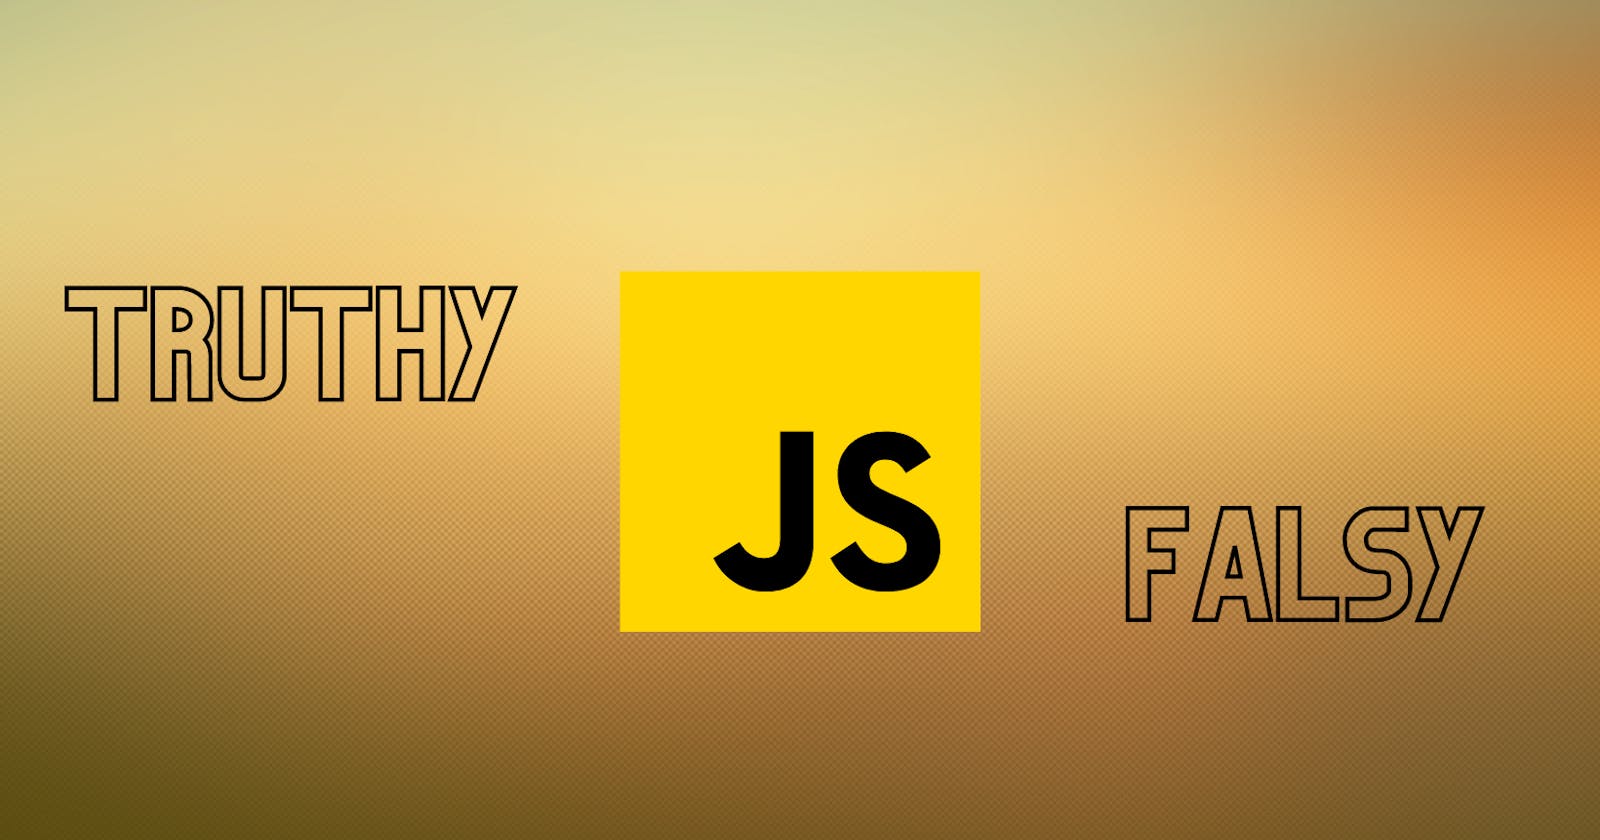 What is Truthy and Falsy in JavaScript?